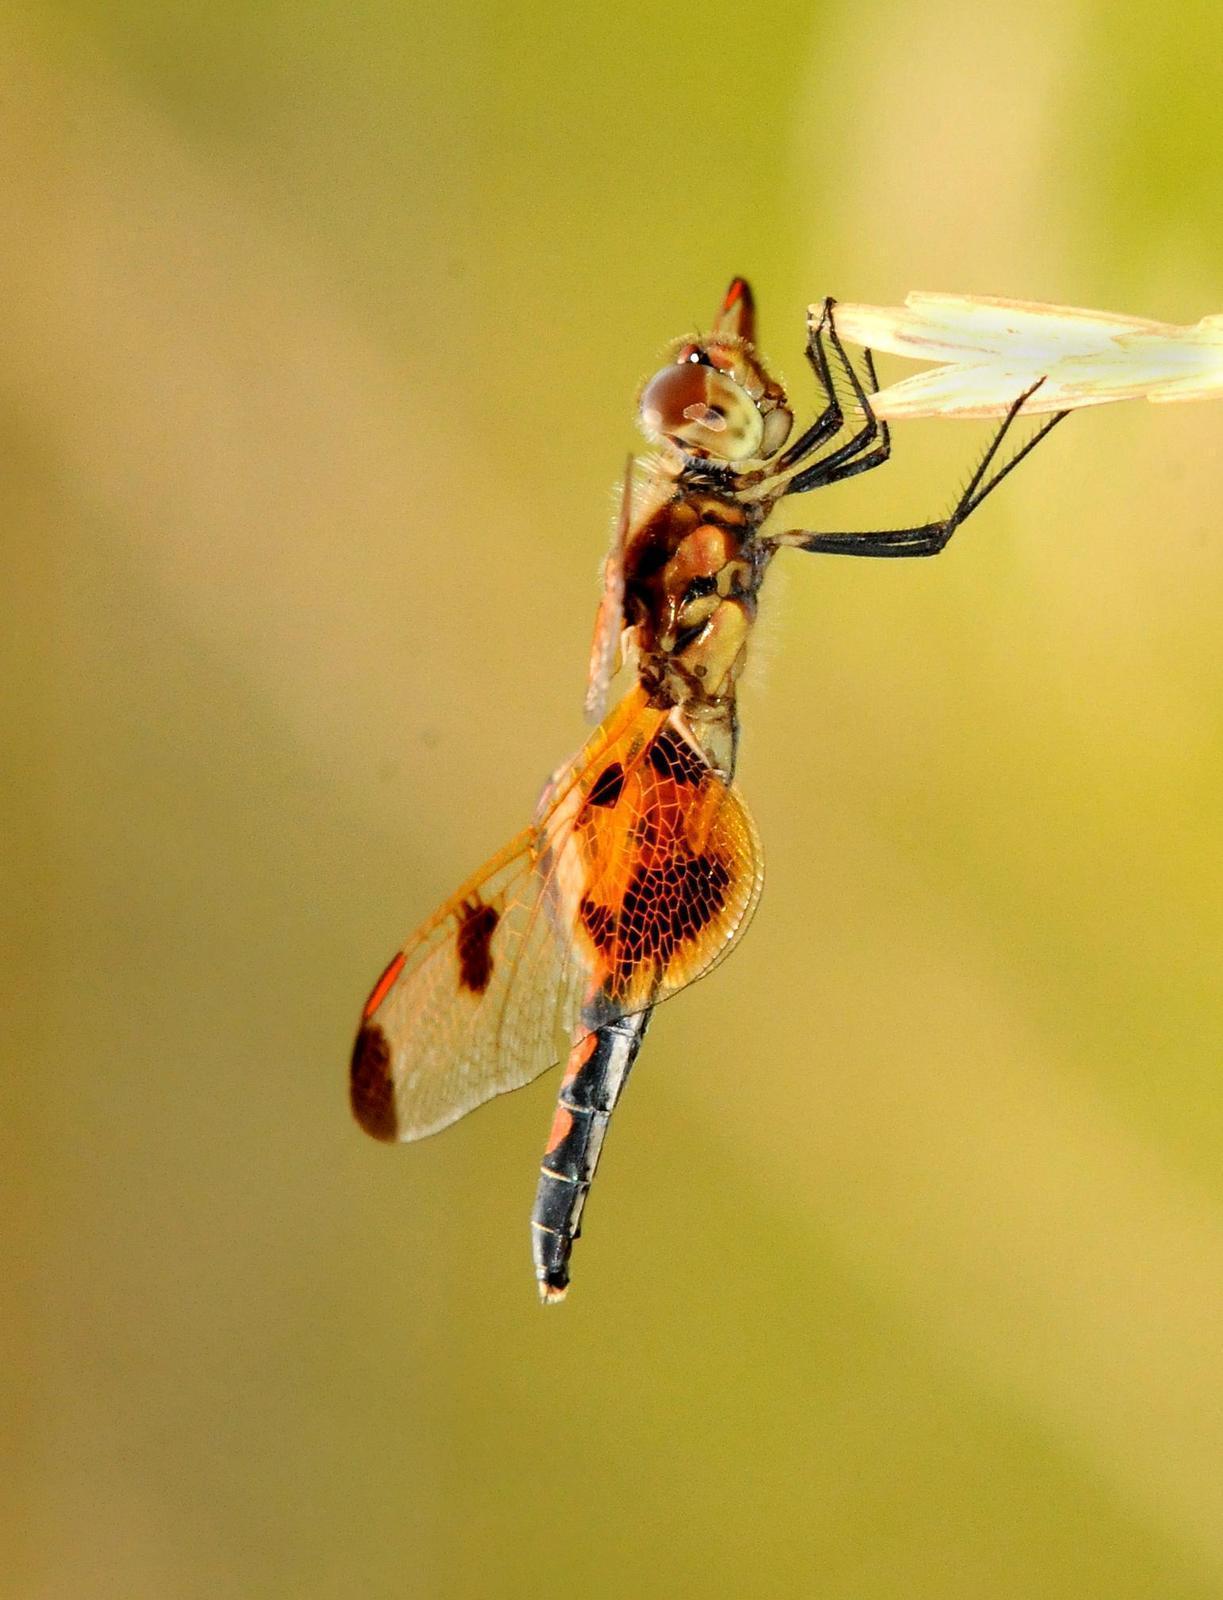 Calico Pennant Photo by Steven Mlodinow